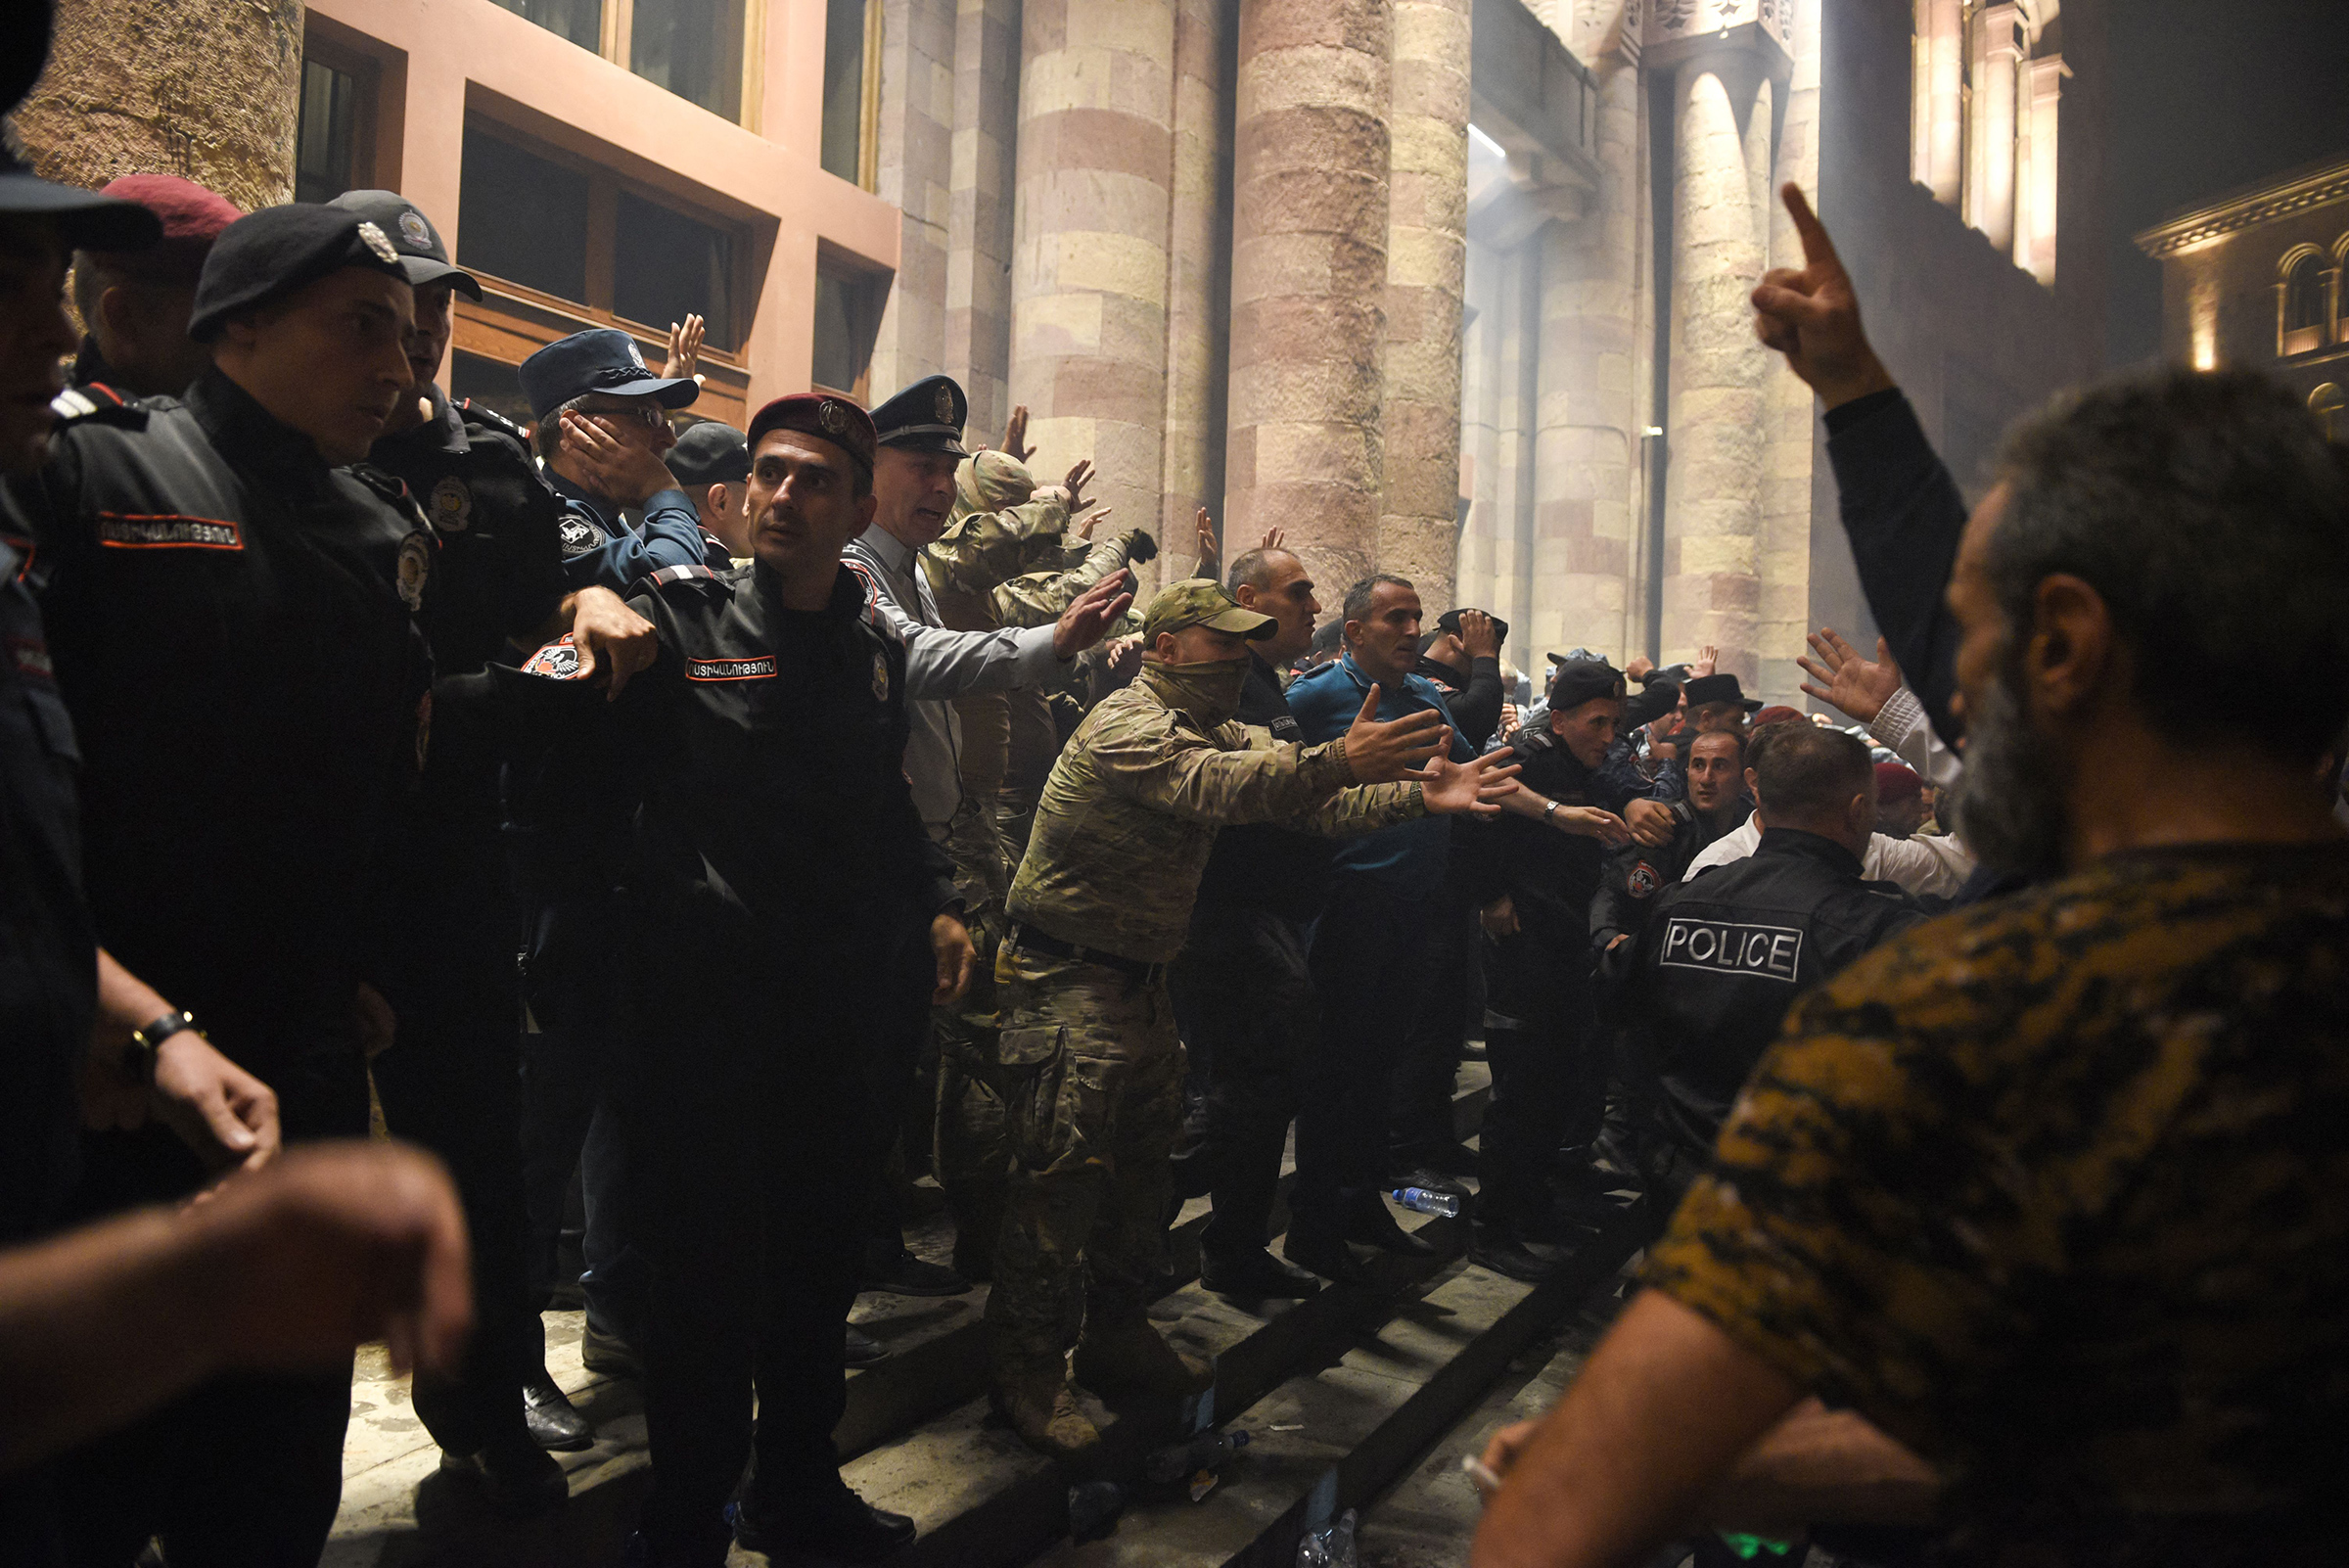 Protesters clash with police as they call on Armenian Prime Minister Nikol Pashinyan to resign in central Yerevan on Sept. 19. Azerbaijan launched a military operation against the breakaway Nagorno-Karabakh region, warning it would "continue until the end" in the territory.